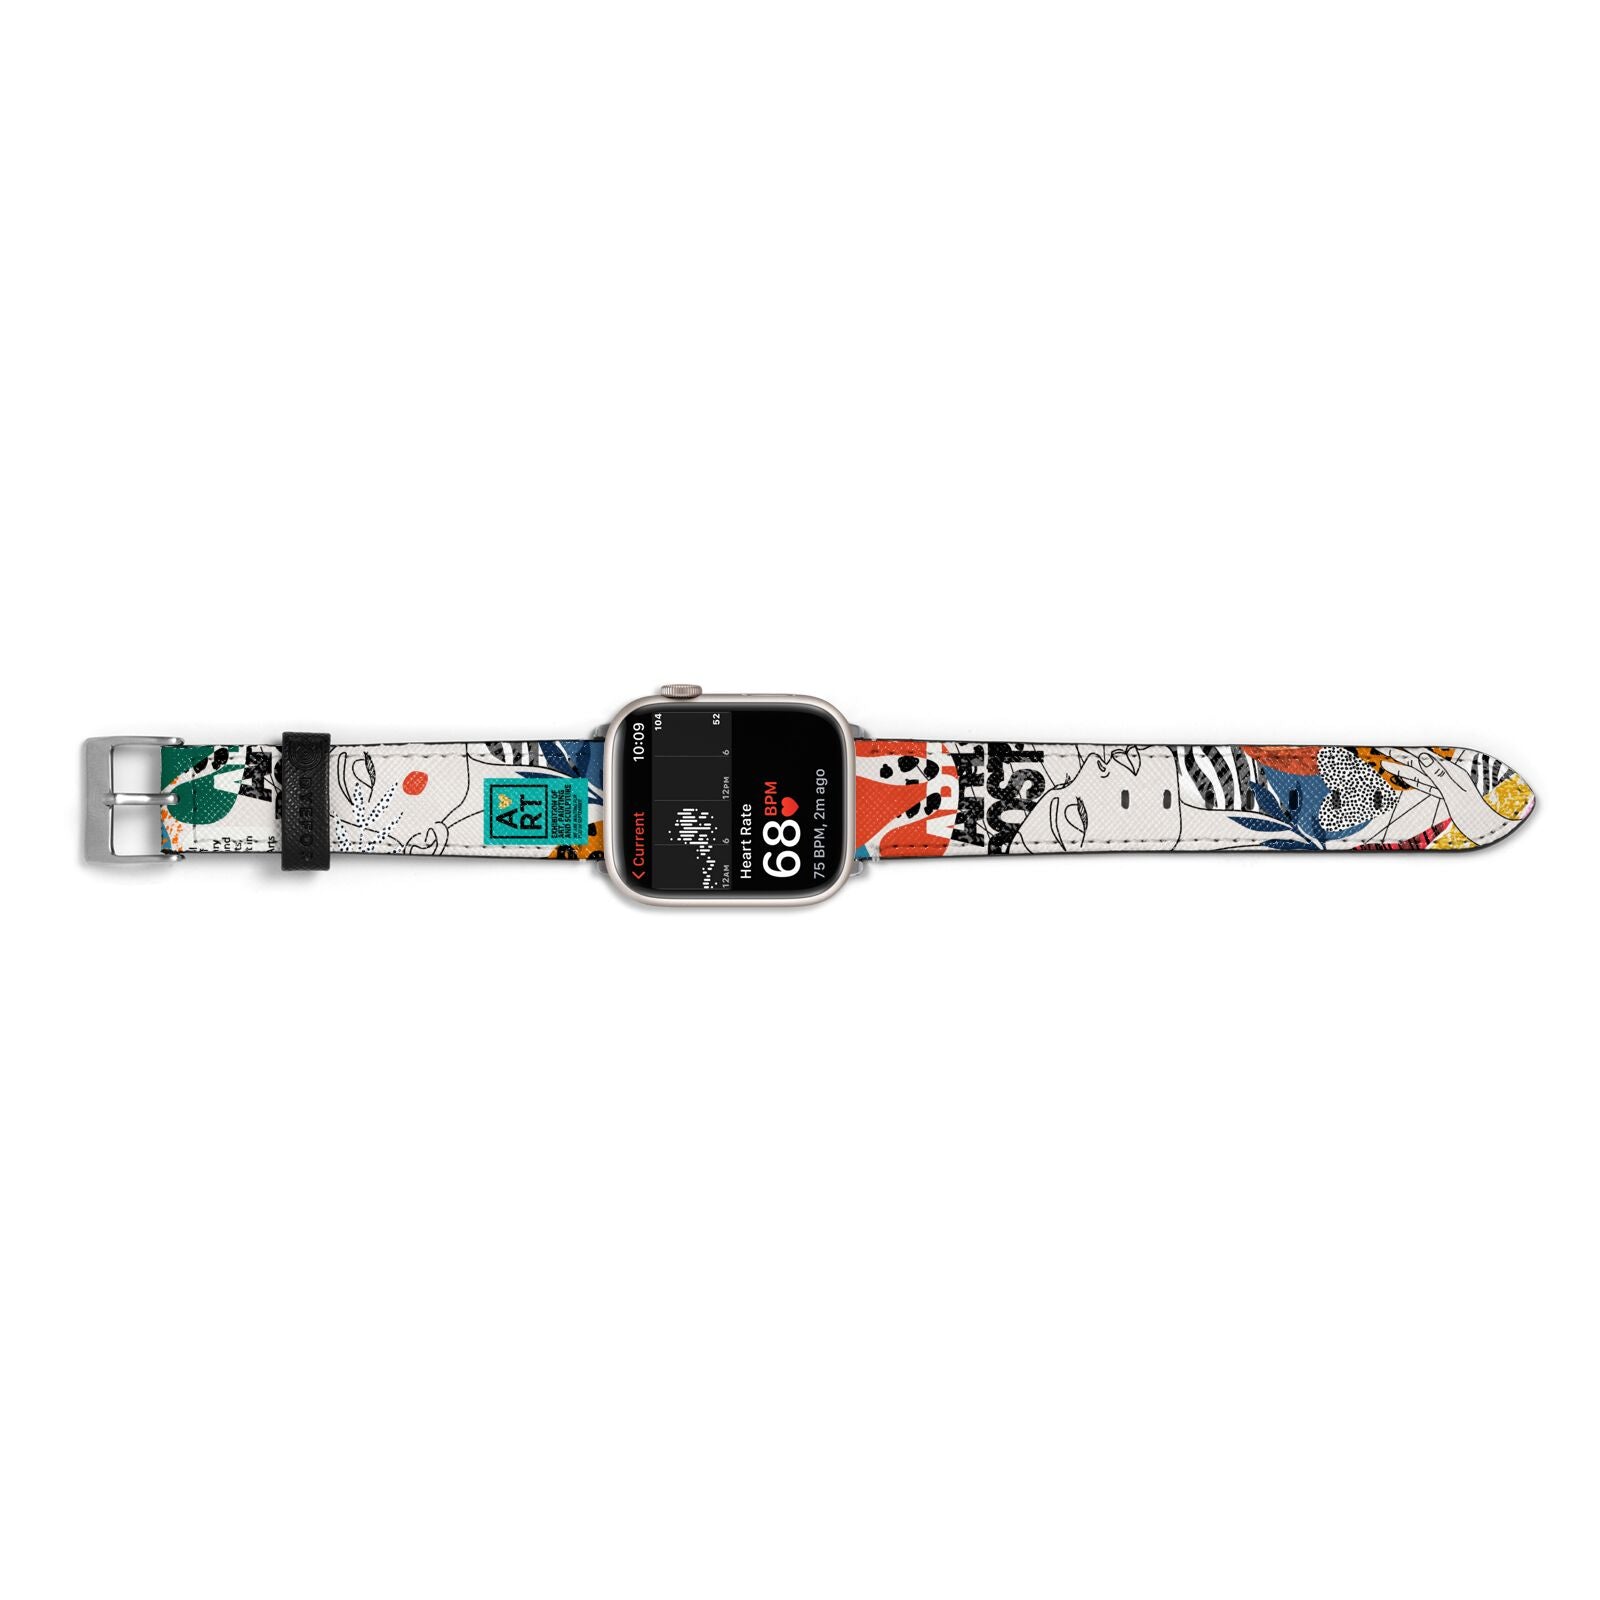 Abstract Art Poster Apple Watch Strap Size 38mm Landscape Image Silver Hardware